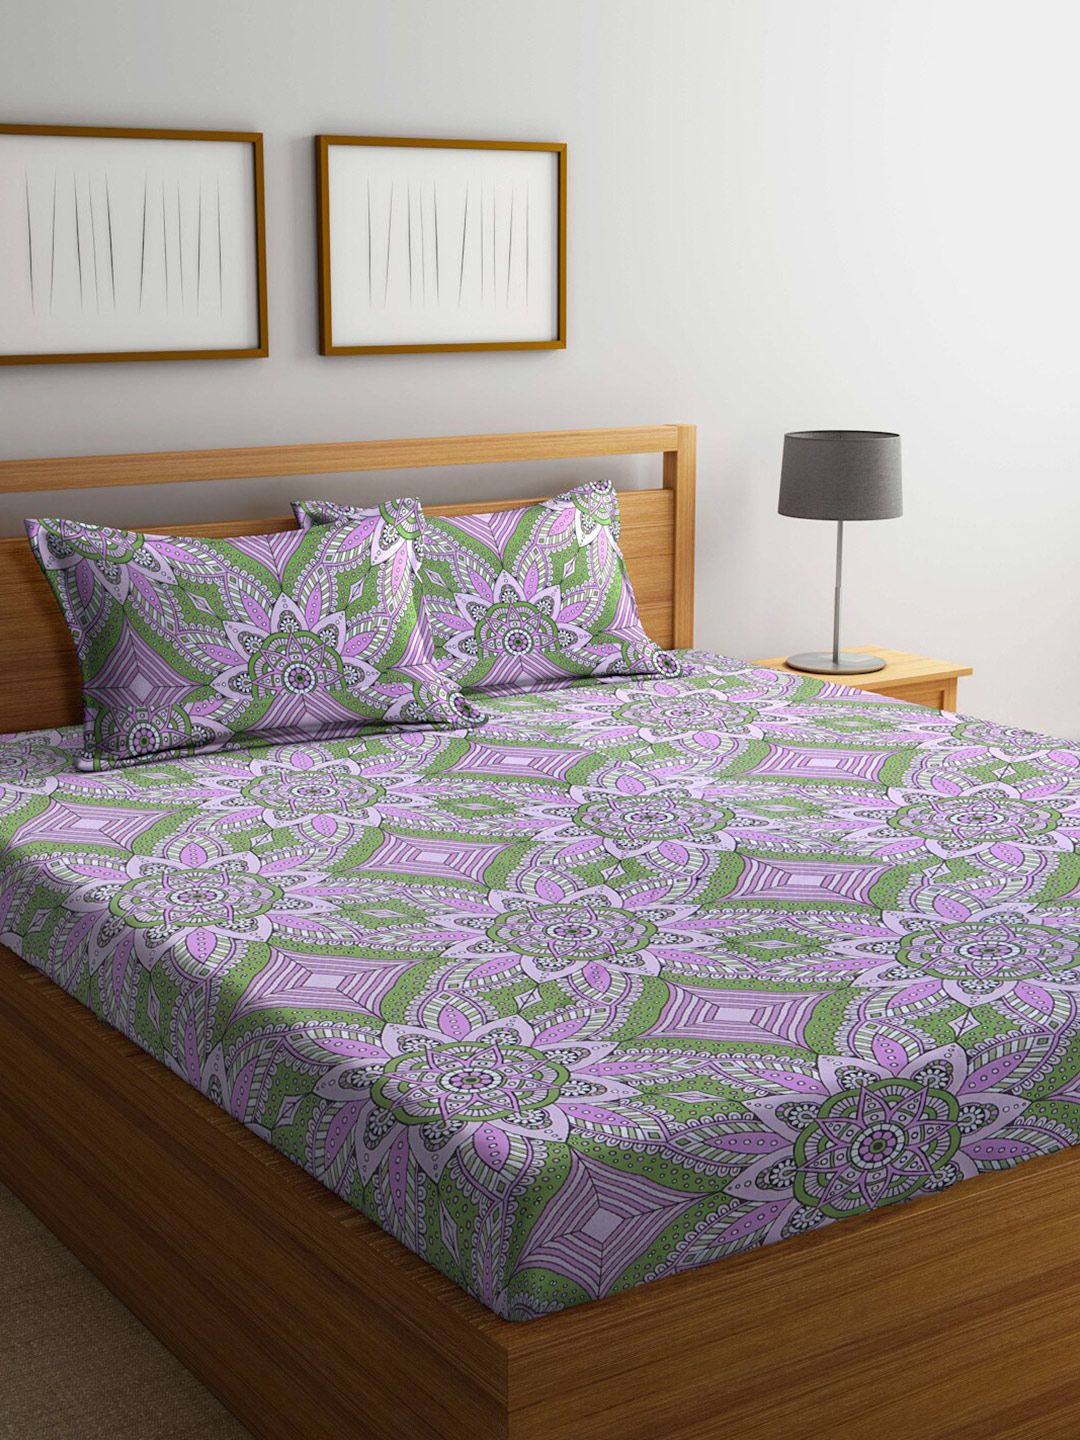 BOMBAY DYEING Floral 100 TC Cotton King Bedsheet with 2 Pillow Covers Price in India